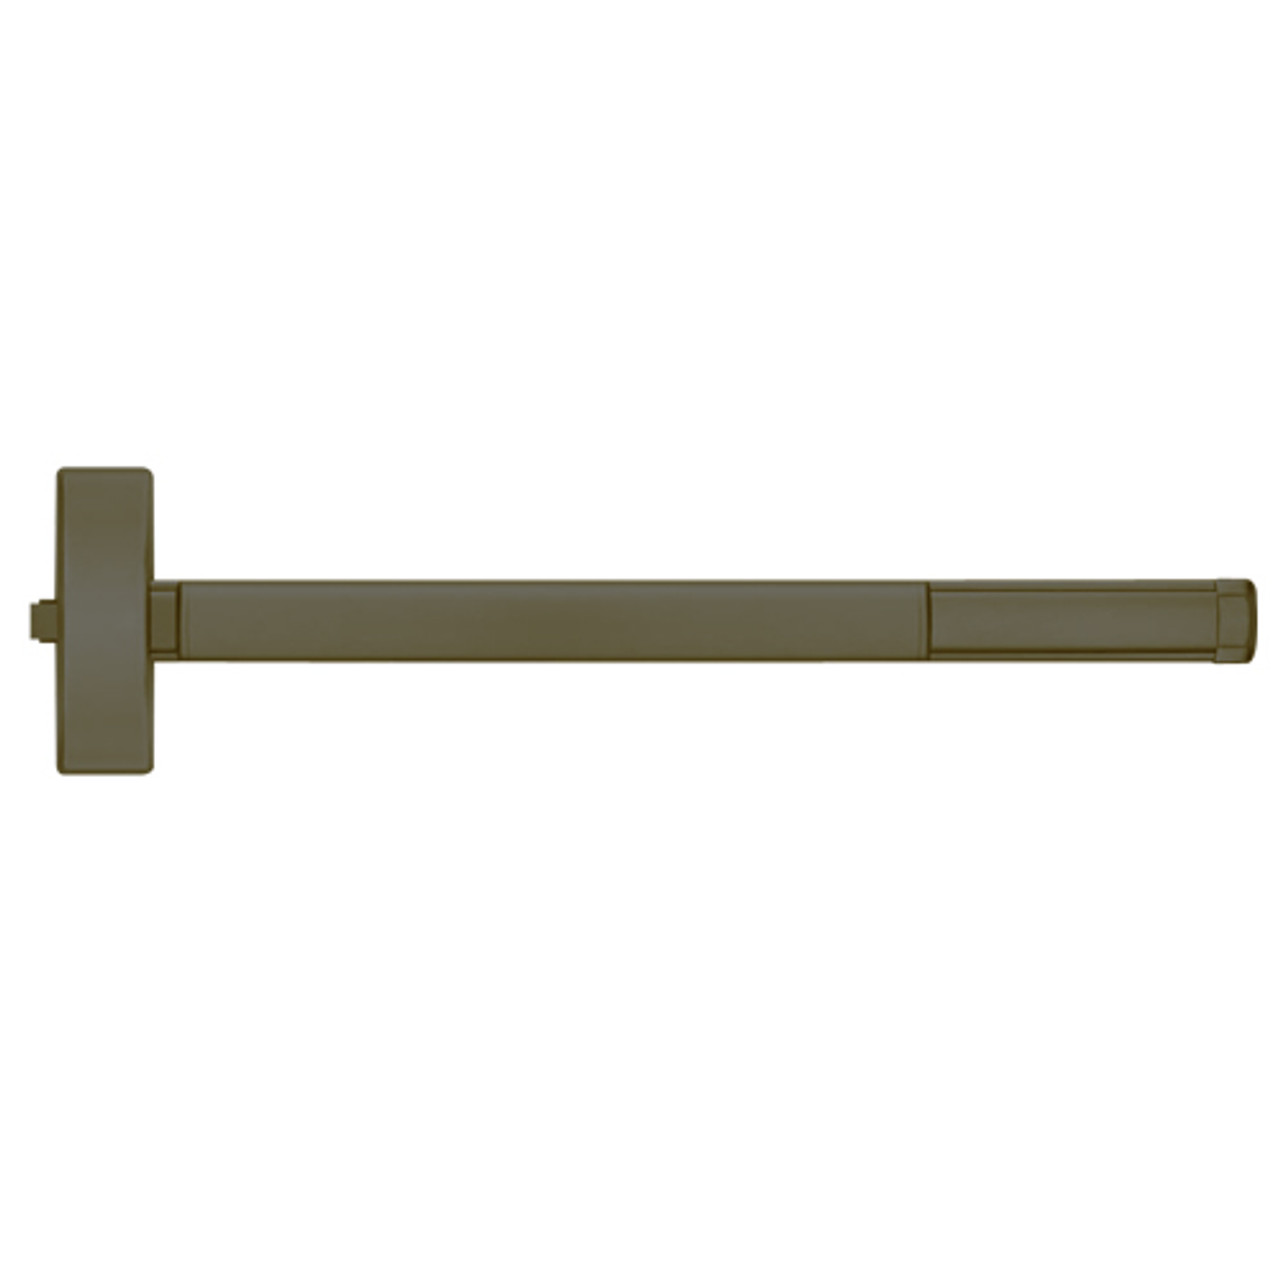 DE2103-613-36 PHI 2100 Series Non Fire Rated Apex Rim Exit Device with Delayed Egress Prepped for Key Retracts Latchbolt in Oil Rubbed Bronze Finish